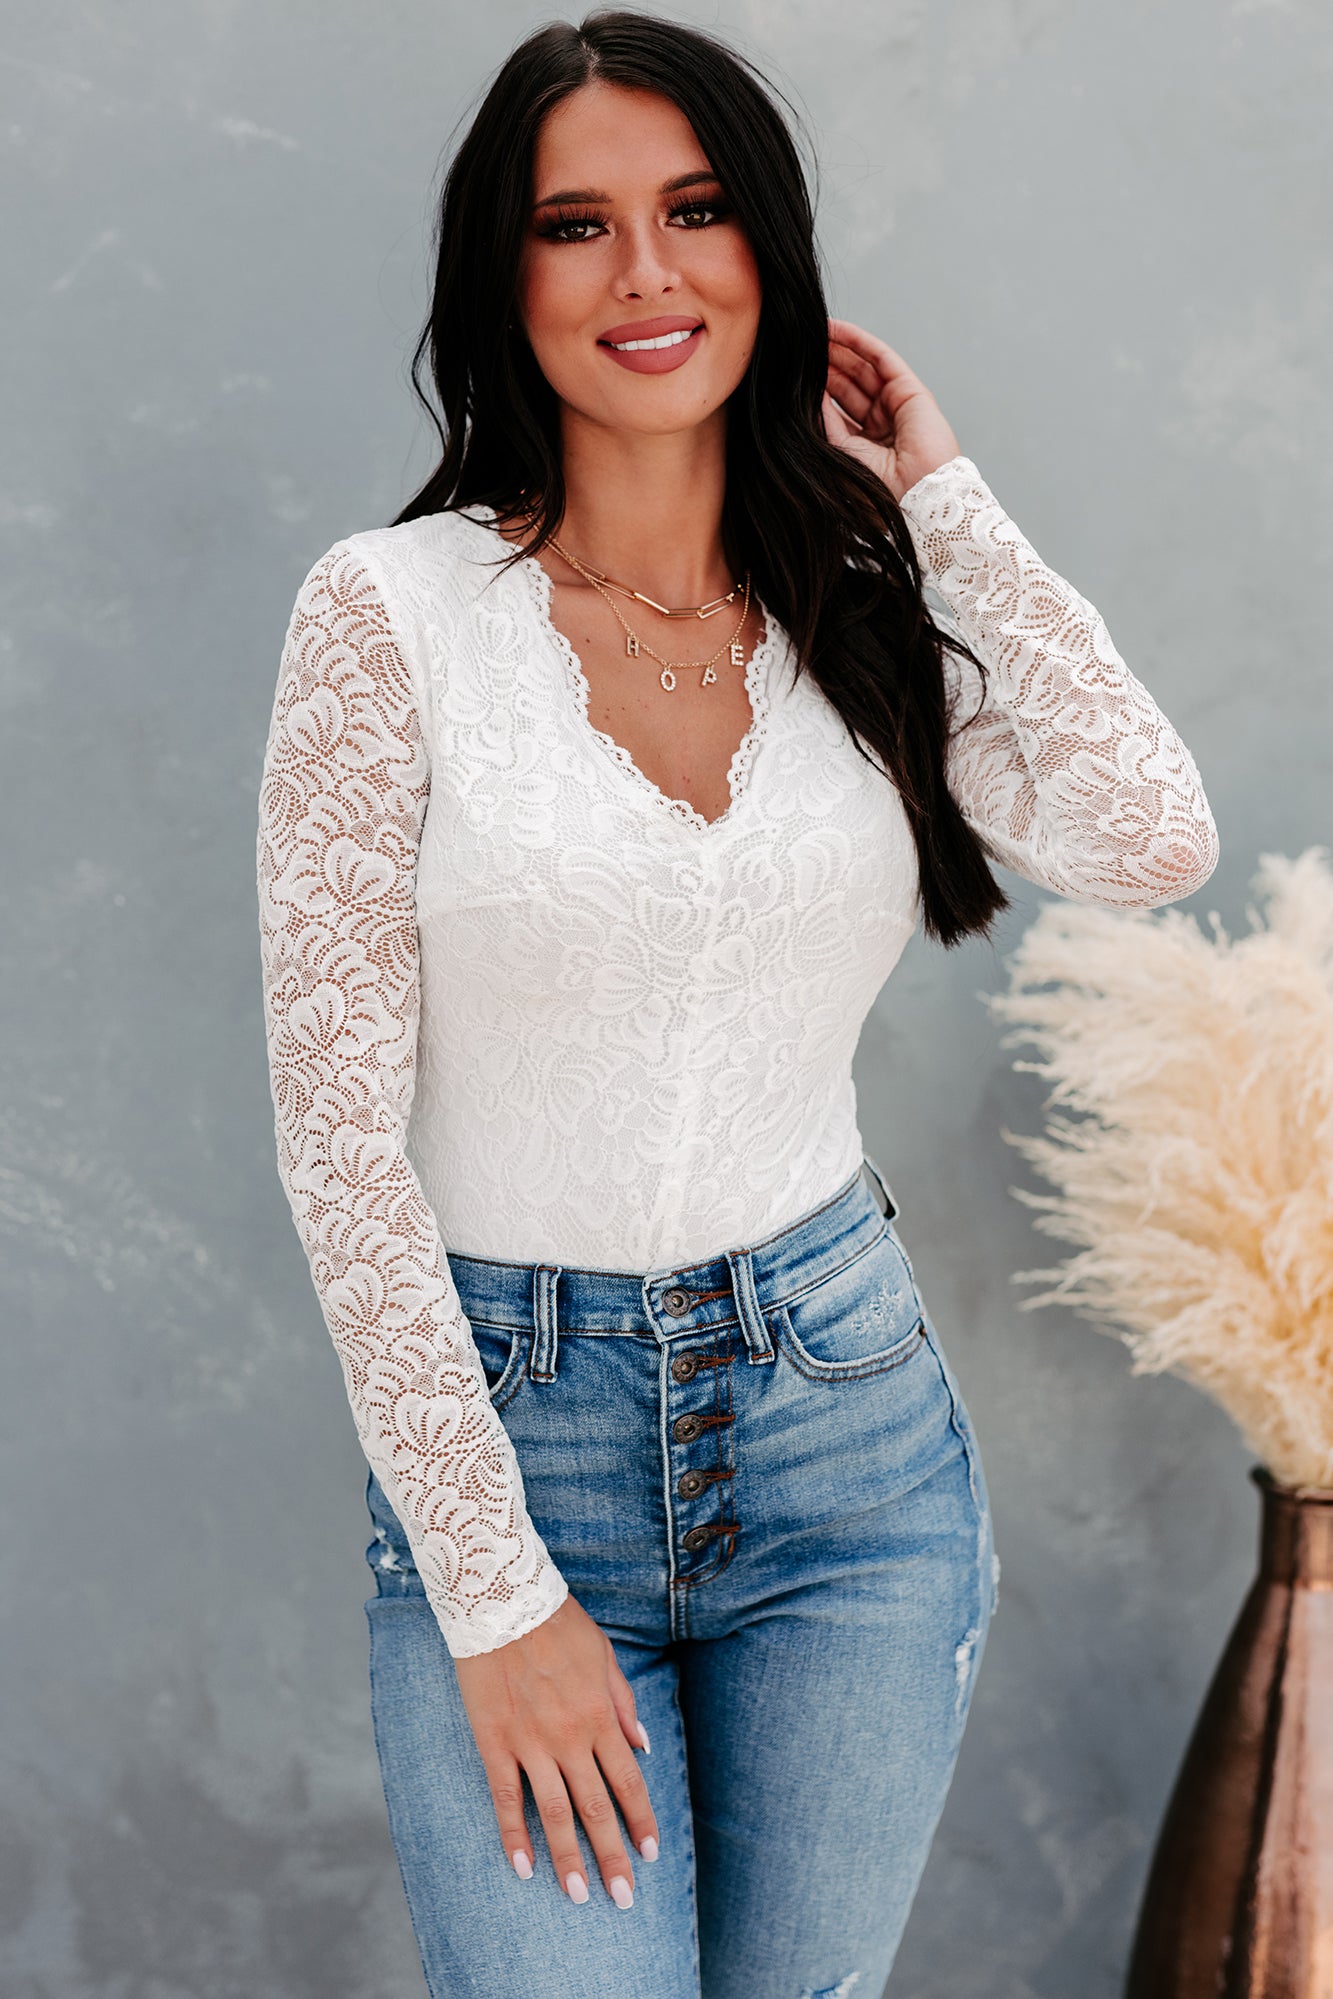 White Lace Long Sleeve Bodysuit, Tops